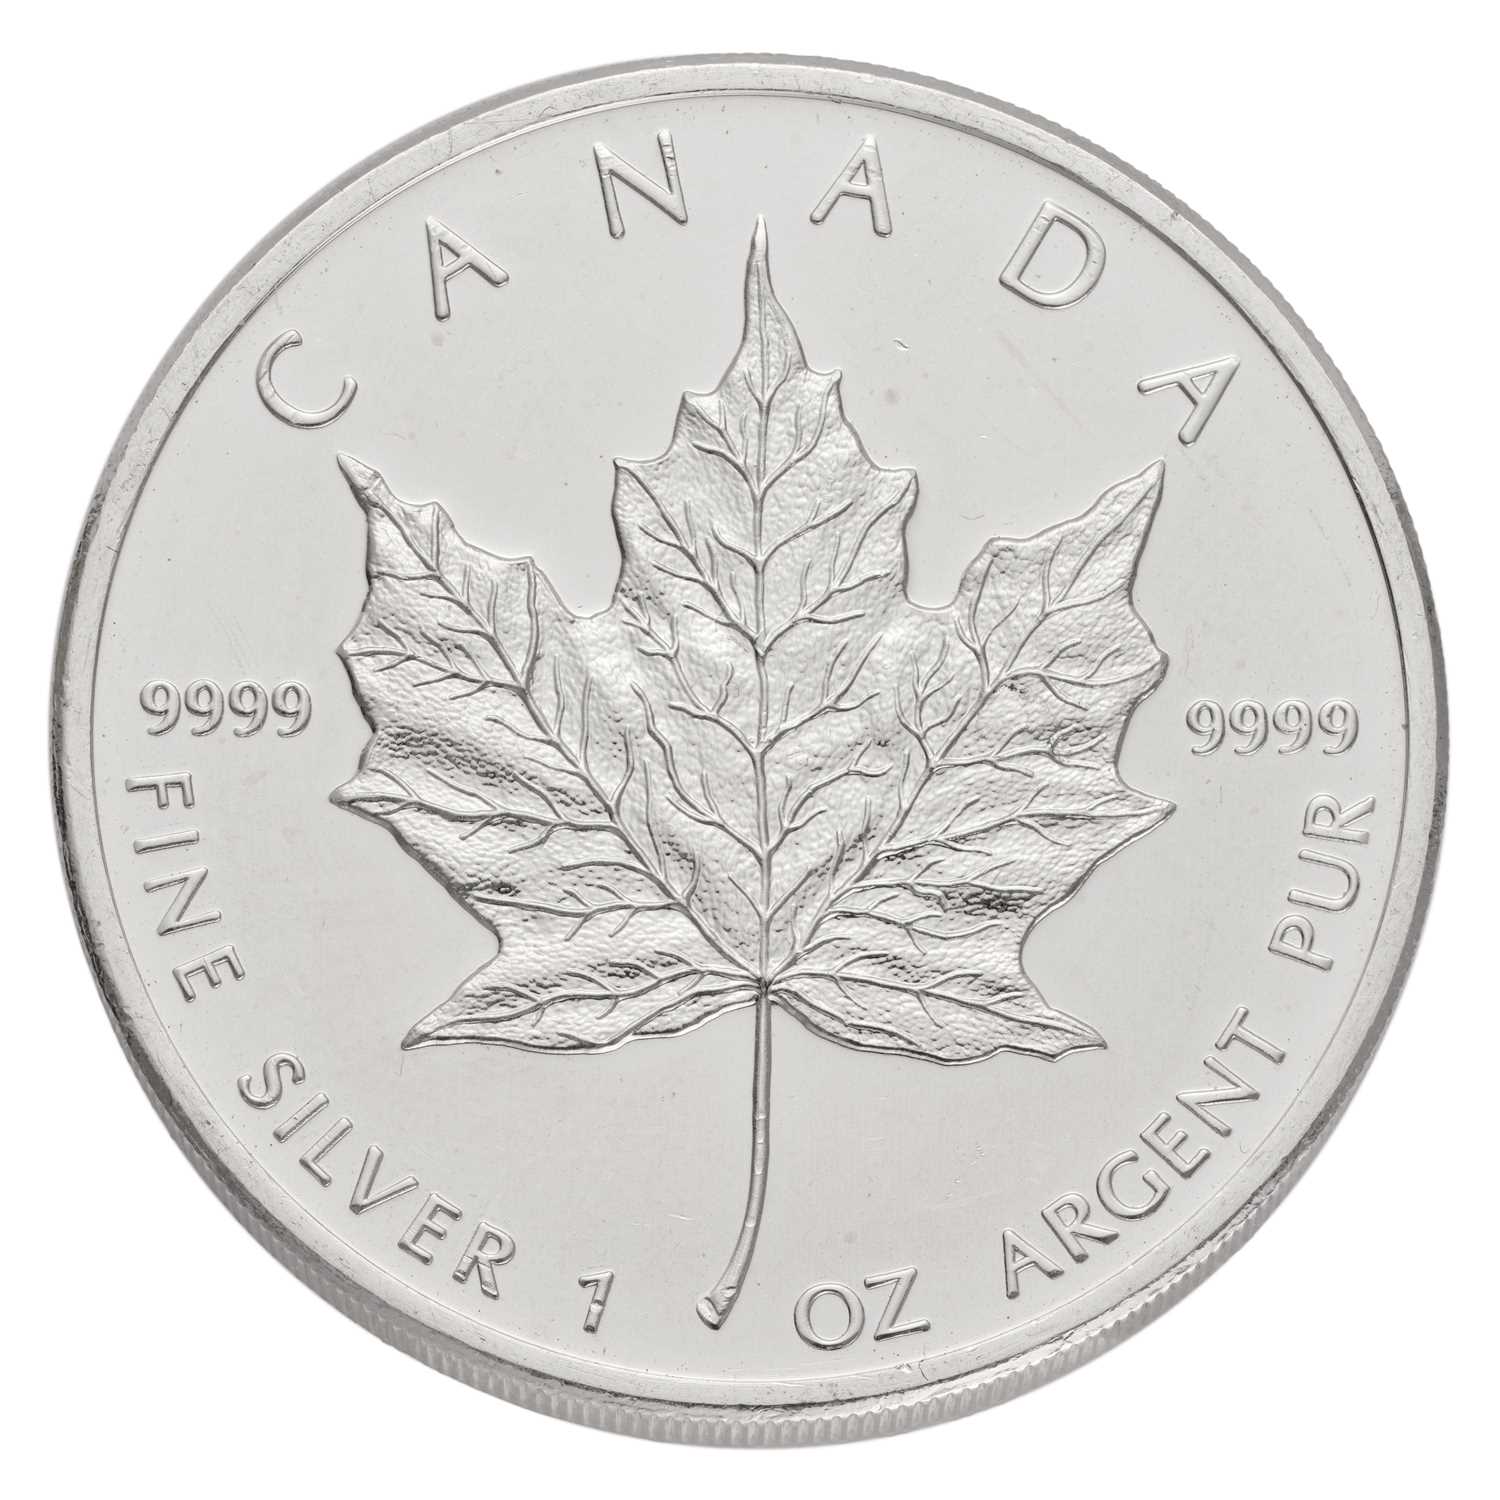 23x Canada 1oz Fine Silver Maple Leaf Coins, to include; 2x 1997, 1998, 1999, 2x 2003, 5x 2006, 2x - Image 4 of 5